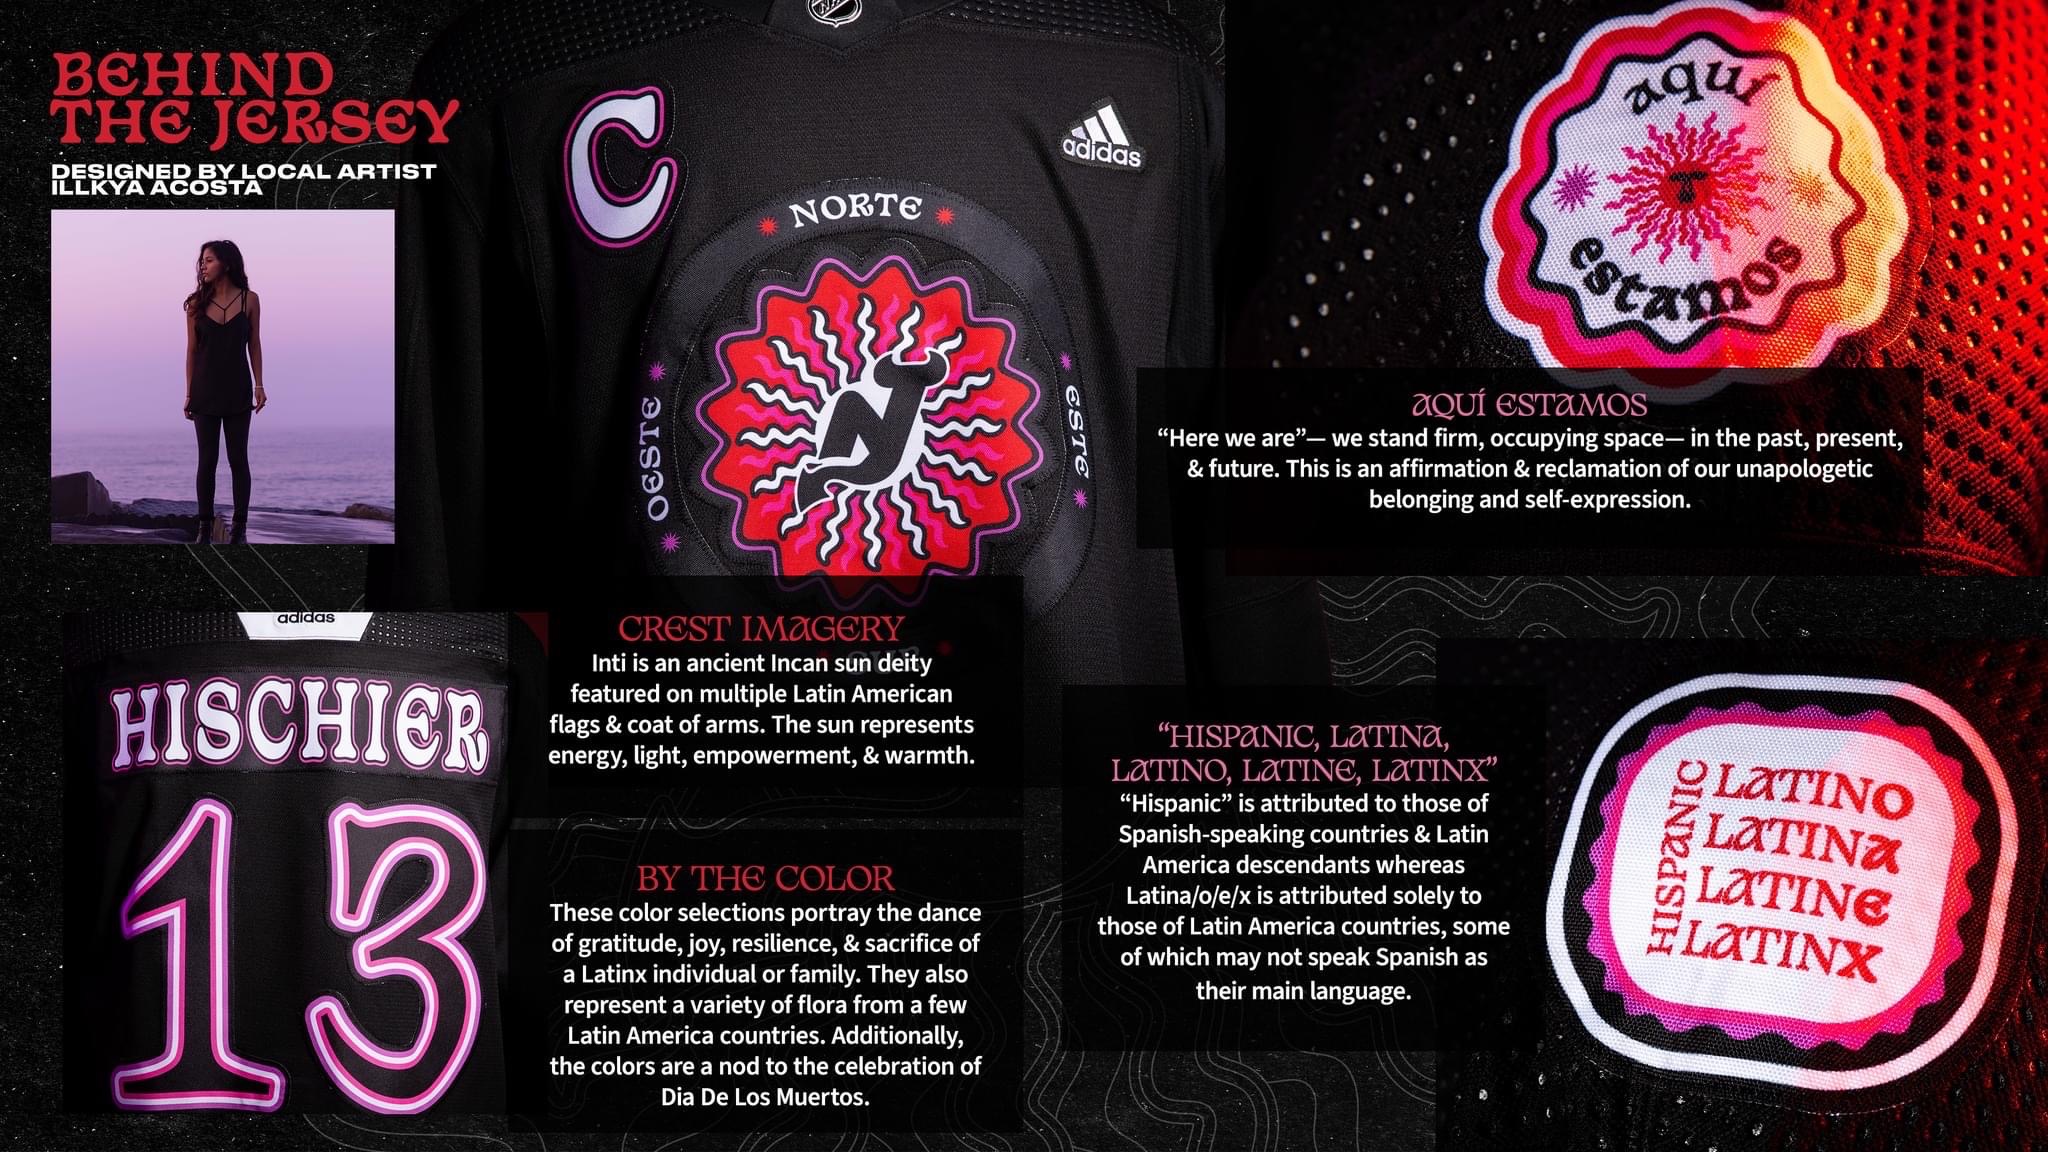 The New Jersey Devils celebrates Chinese Lunar New Year in NHL